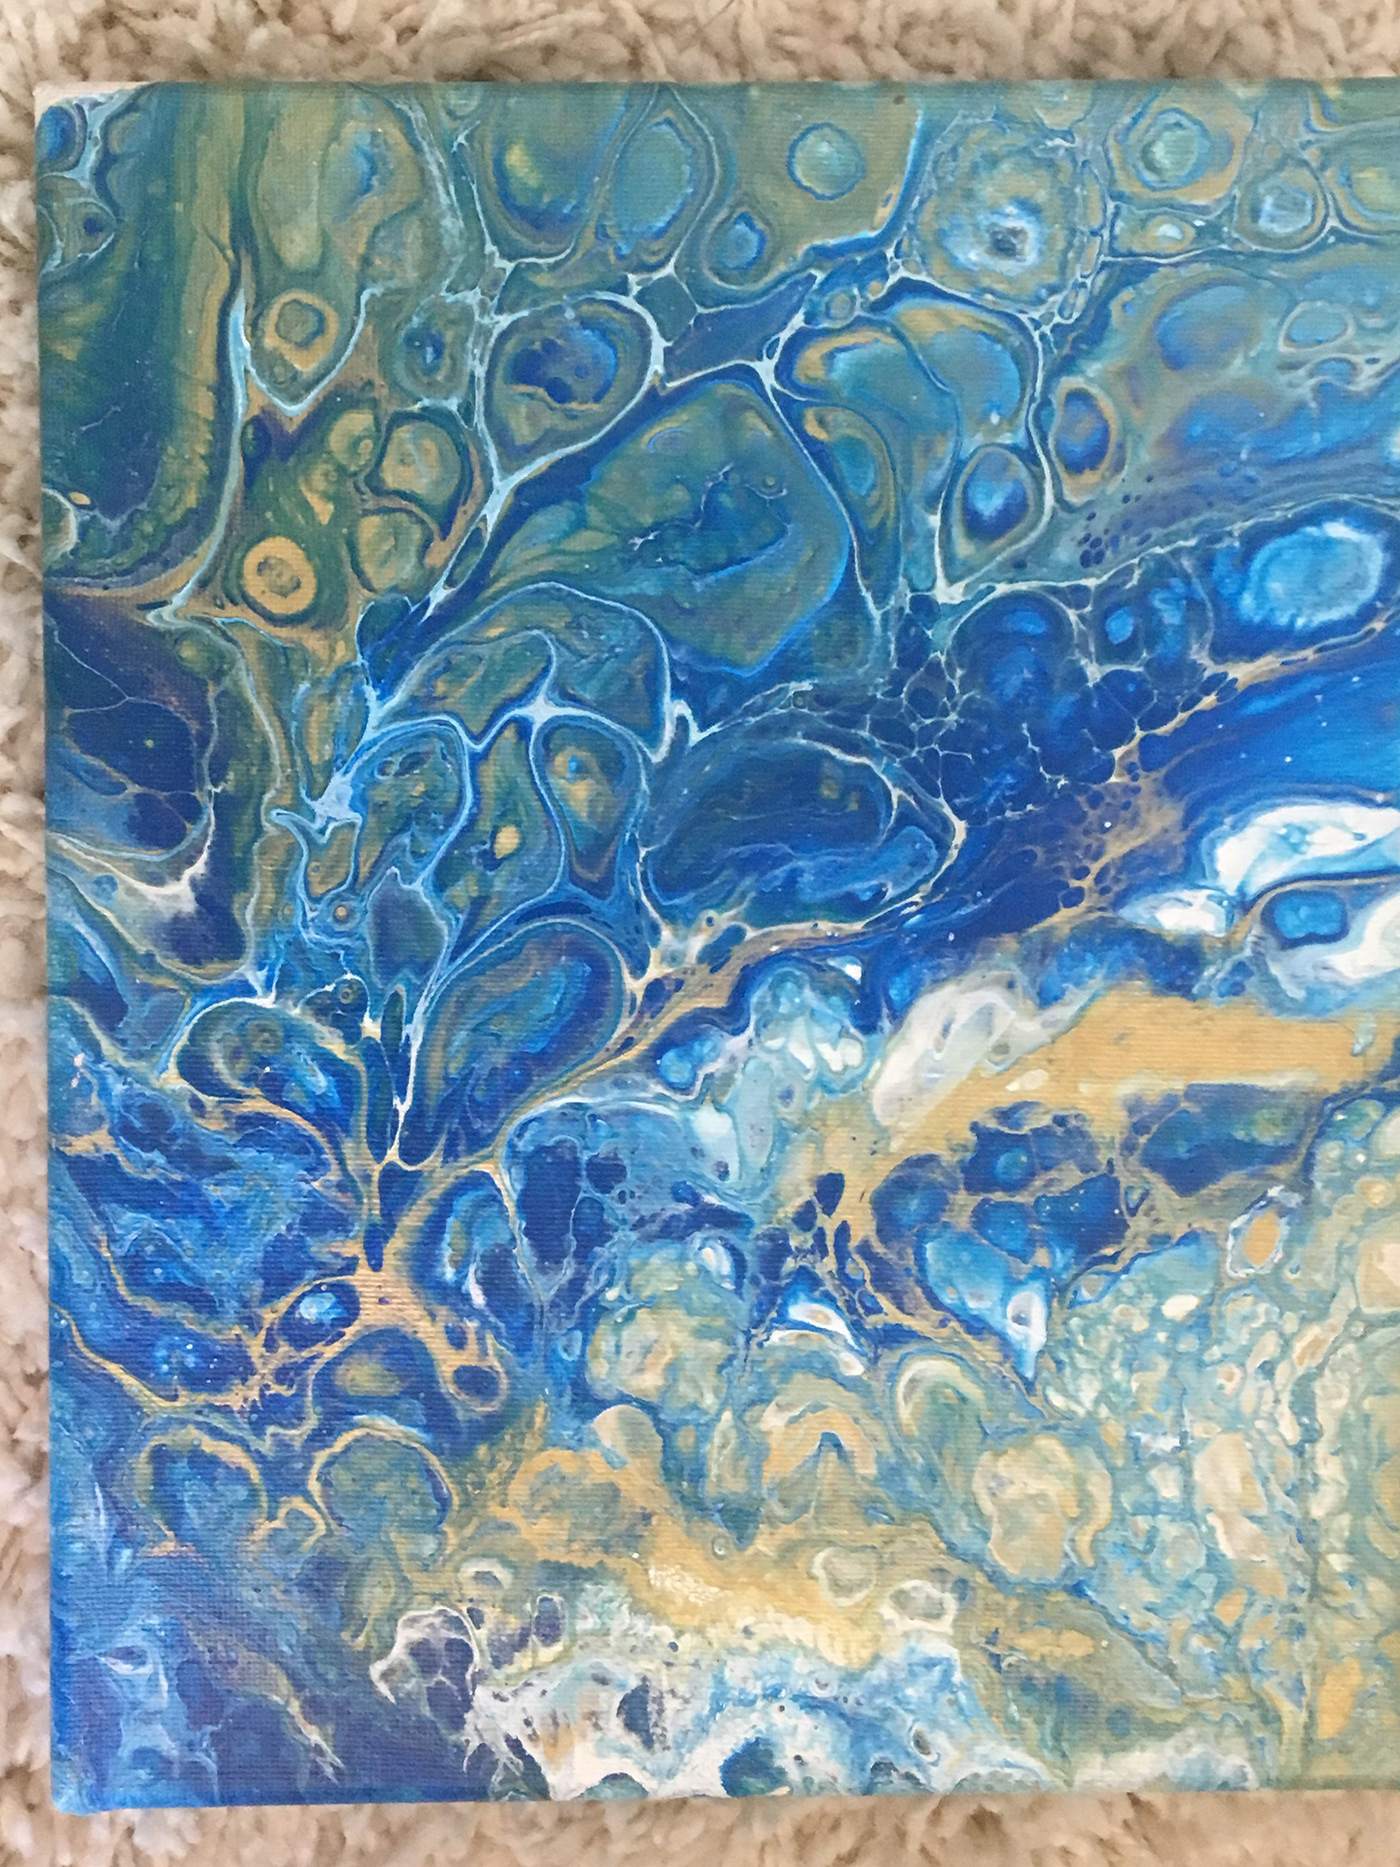 8x10 stretched canvas acrylic pouring Fluid Art